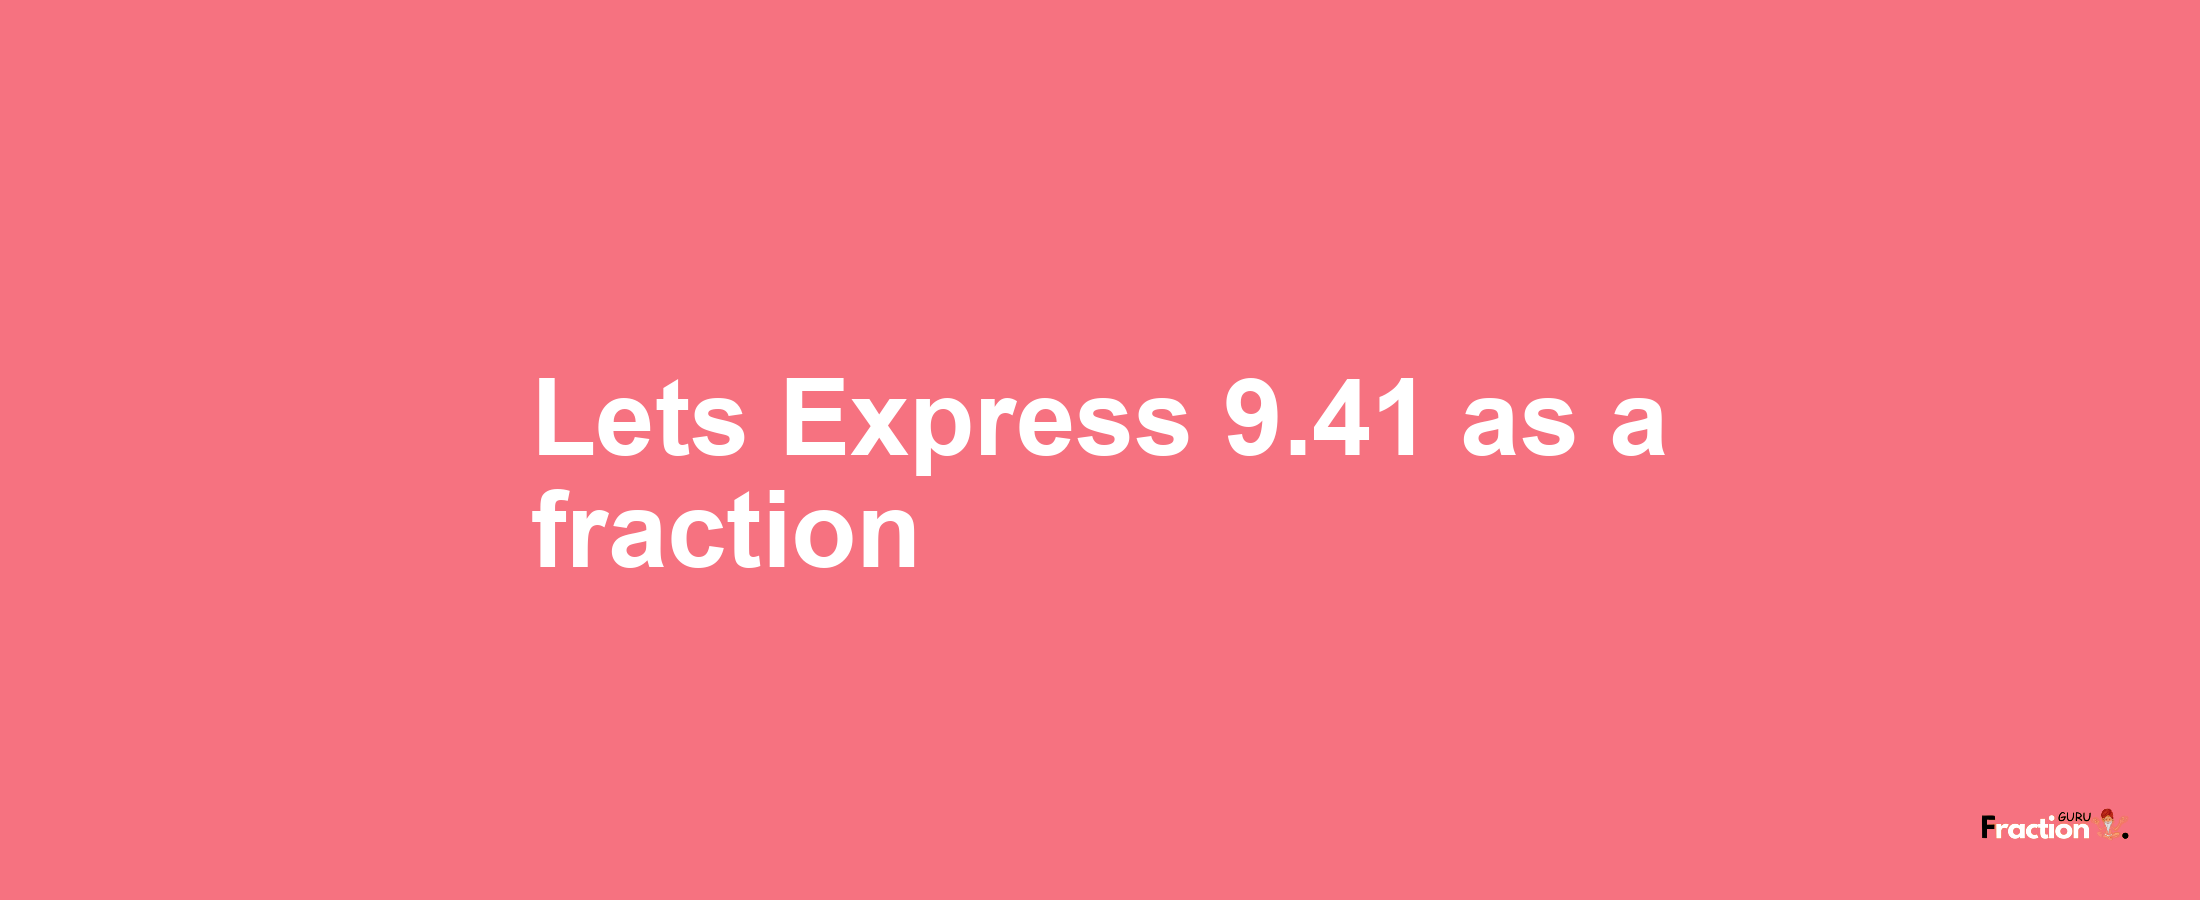 Lets Express 9.41 as afraction